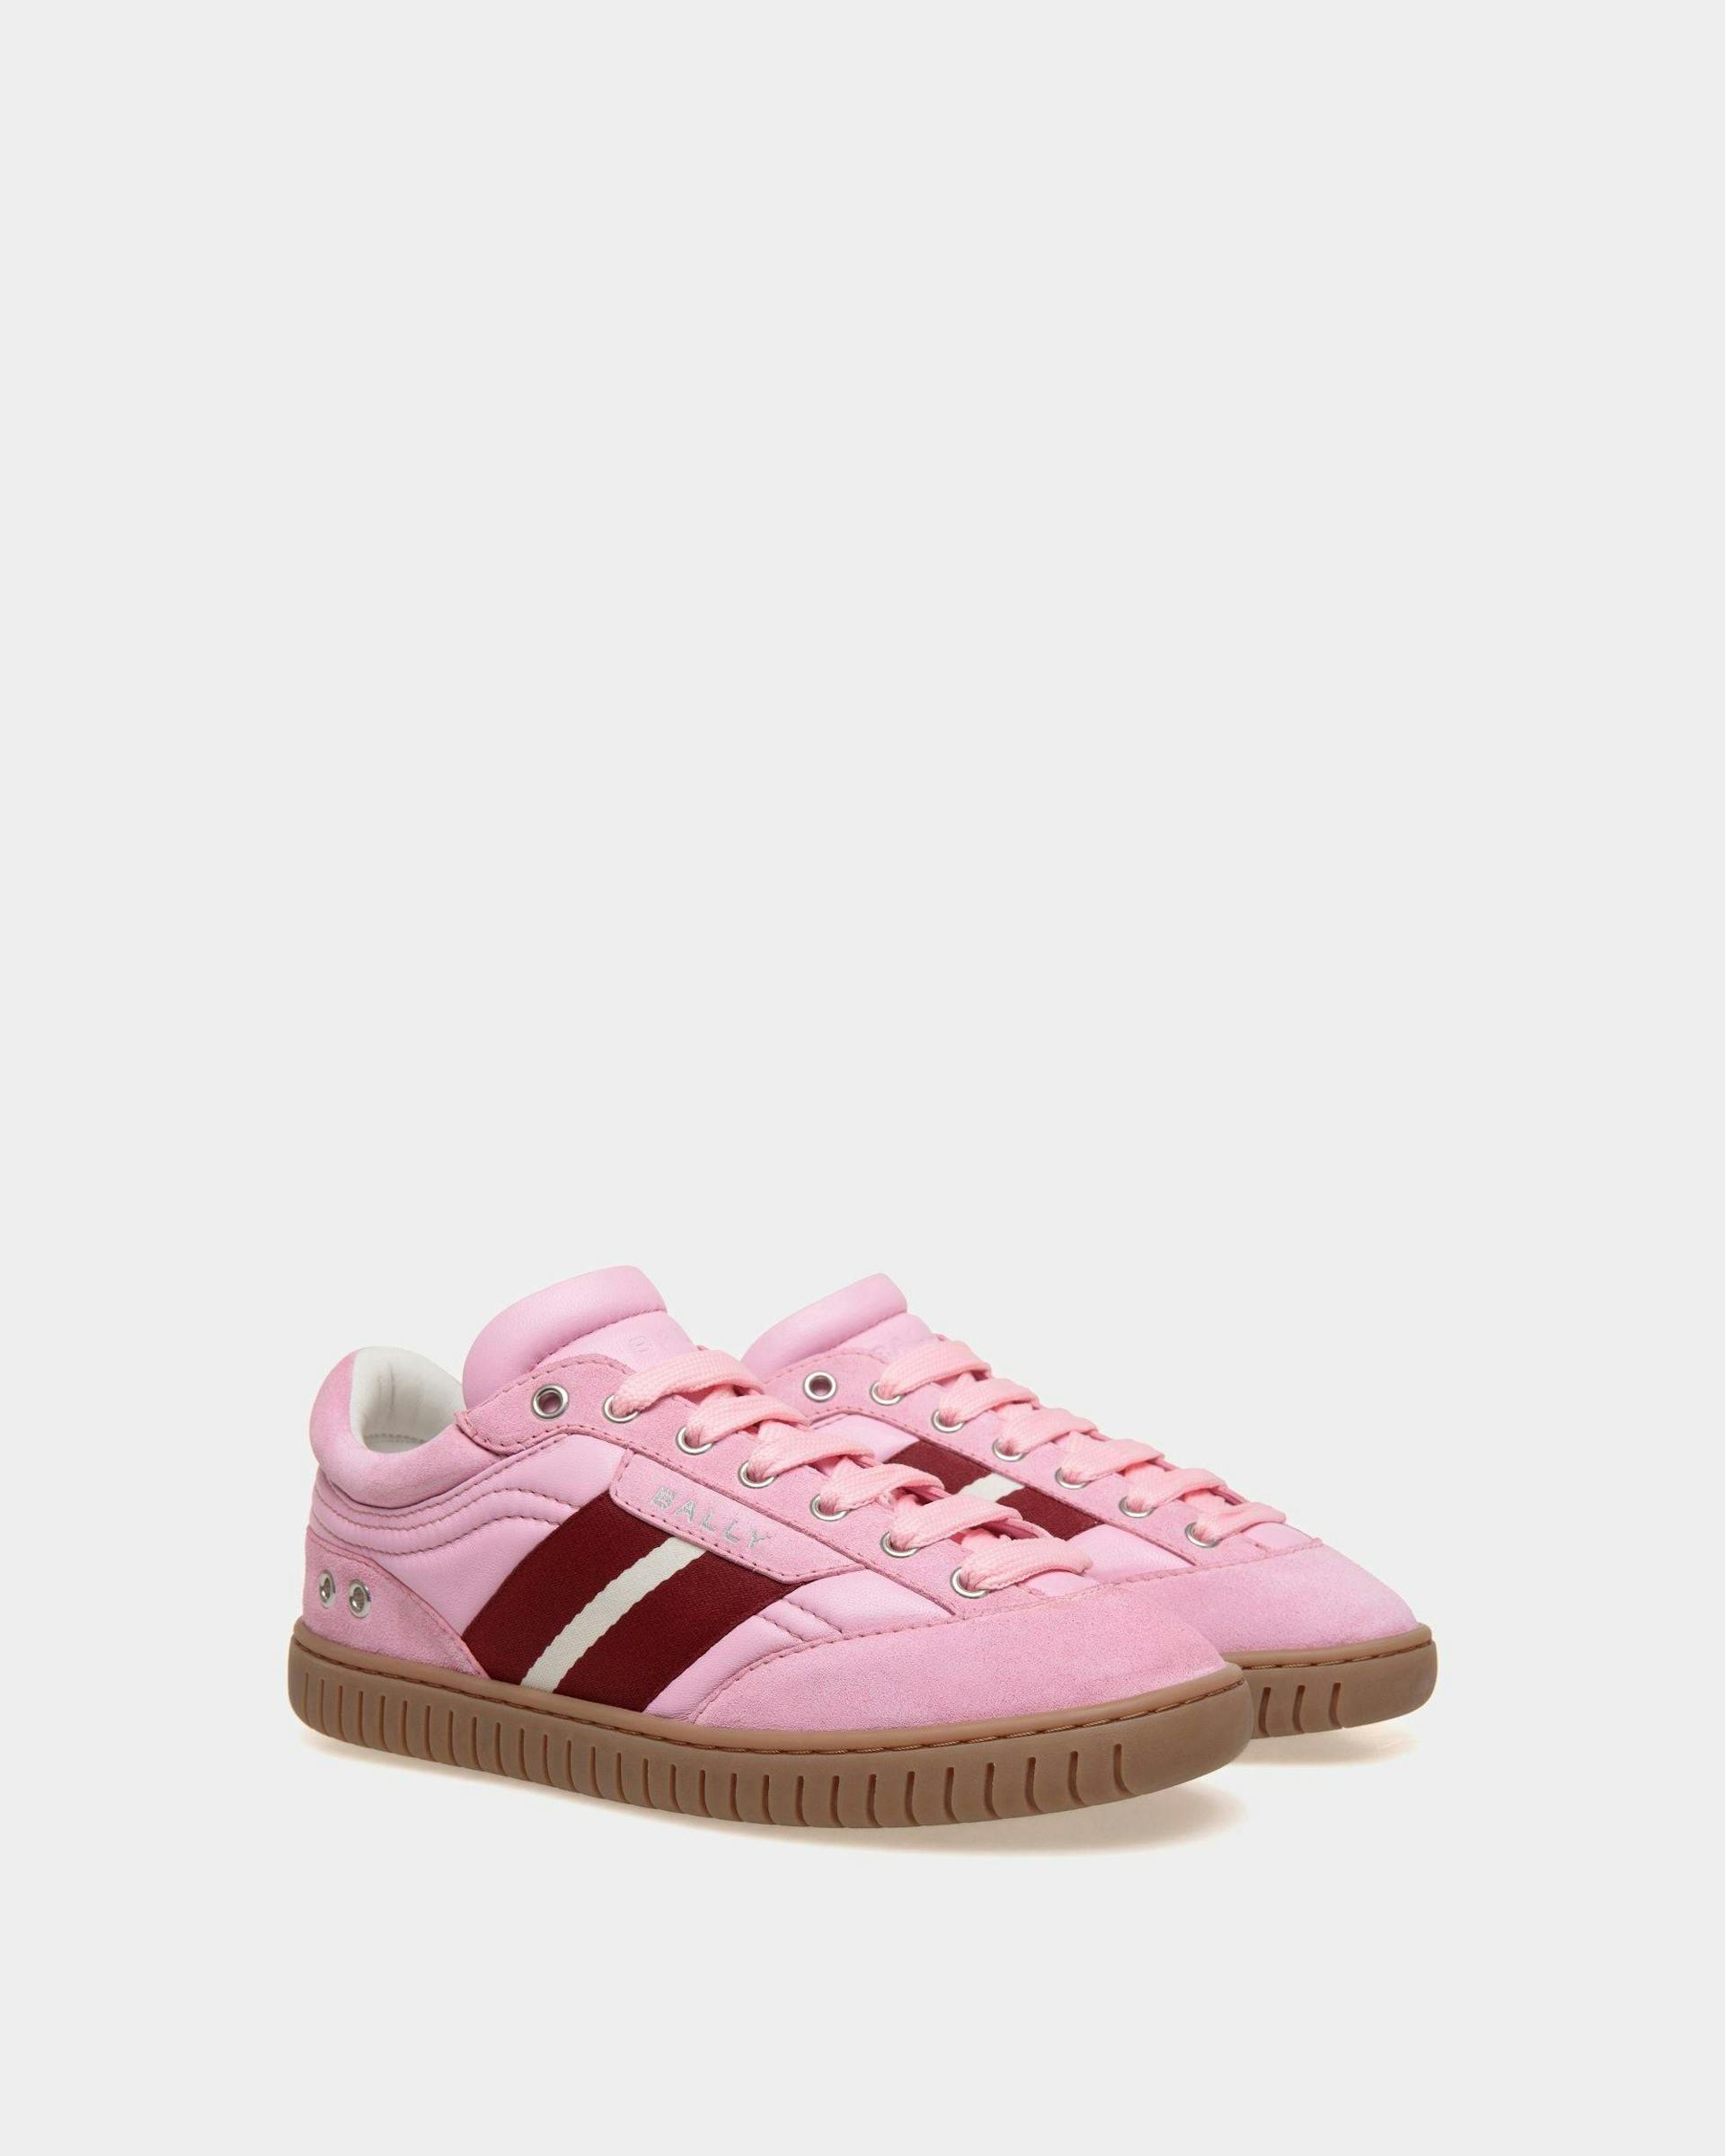 Women's Player Sneaker in Pink Leather and Suede | Bally | Still Life 3/4 Front